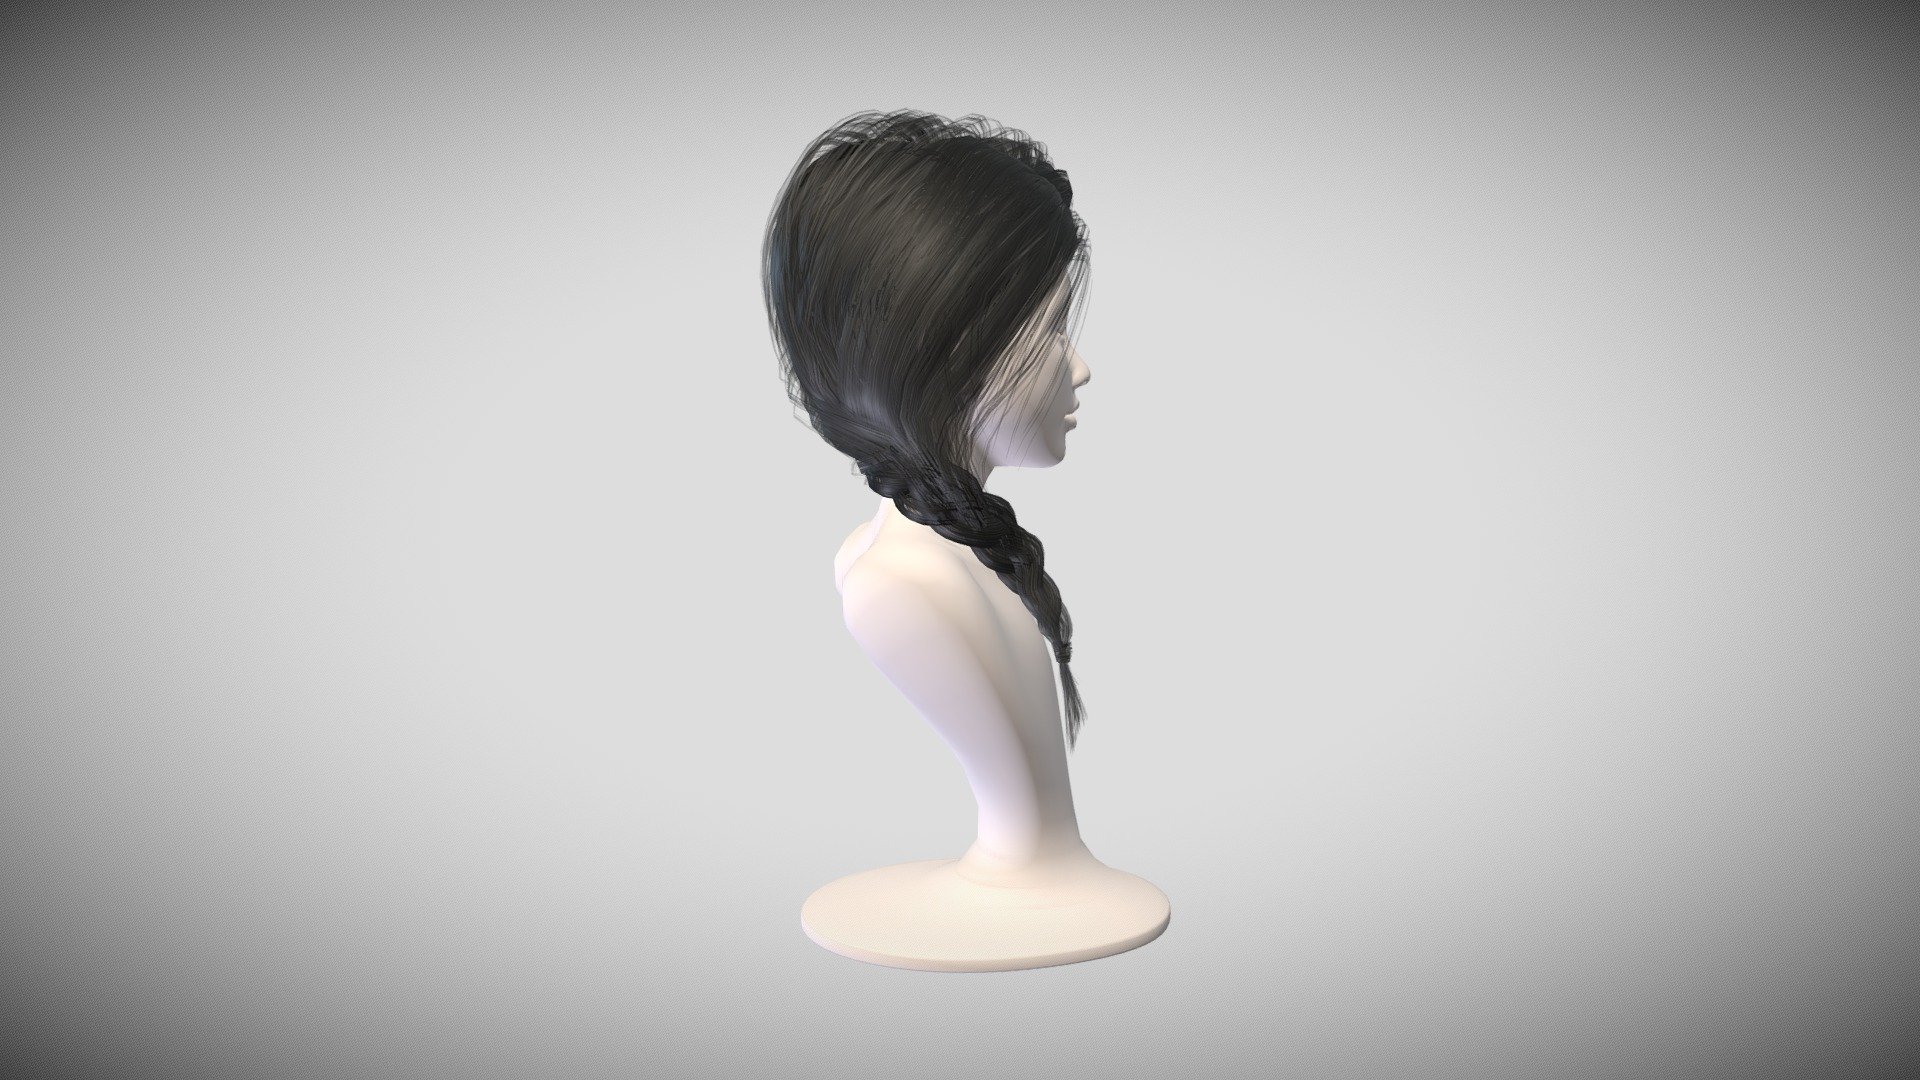 Thank you for the page view.

Real Time Hairstyle optimized for Games.

You can easily change the color of the hair.

It is made in Blender 3.6 (EEVEE Render) ,Cycles rendering is also available.

Hair Texture: 4096; Including Alpha, Depth, ID, Root, Basecolor, Random Color , Normal, Flow, AO, Directional.

Vertices:7296; Edges:12160; Faces:4980; Triangles:9960.

The Hairstyle has a simple and easy-to-edit mesh, and a variety of 4K textures, and you can easily use it in other softwares.

You can use it for personal and commercial projects, educations, games and movies.

Hope you like it! - Realistic Woman braid ponytail Hair Style - 3D model by Dollycat (@dolly201905) 3d model